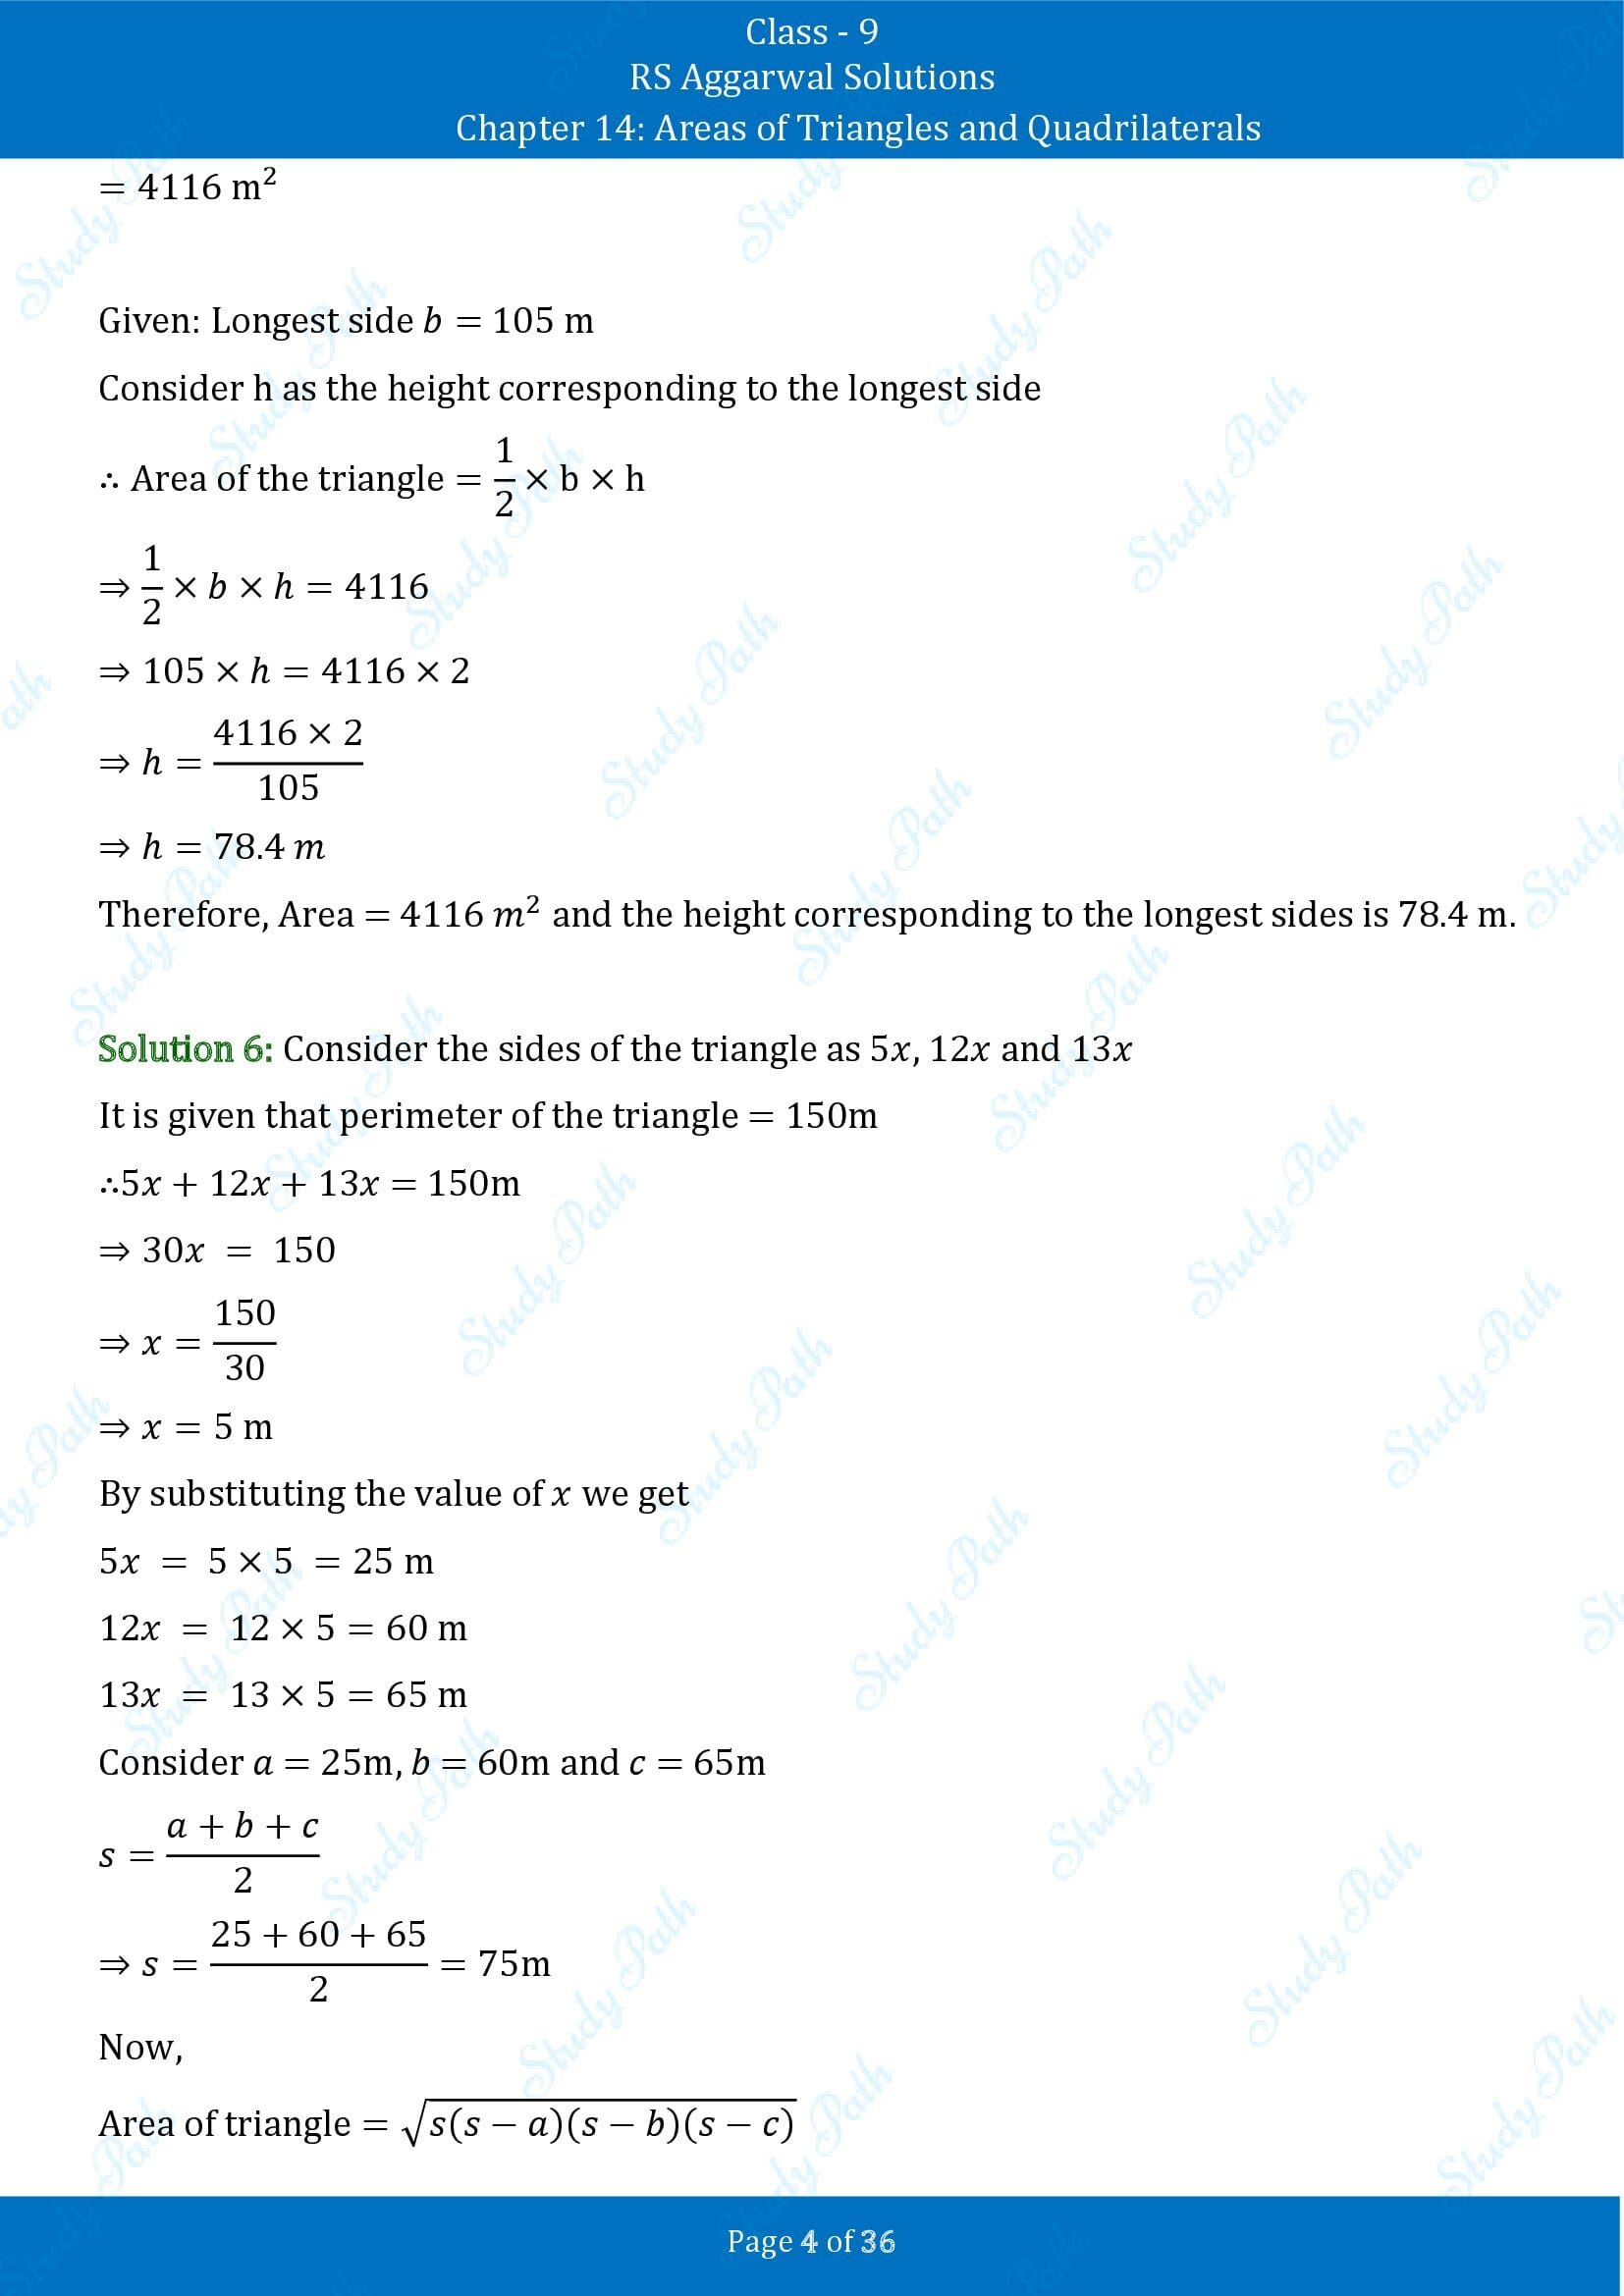 RS Aggarwal Solutions Class 9 Chapter 14 Areas of Triangles and Quadrilaterals Exercise 14 00004